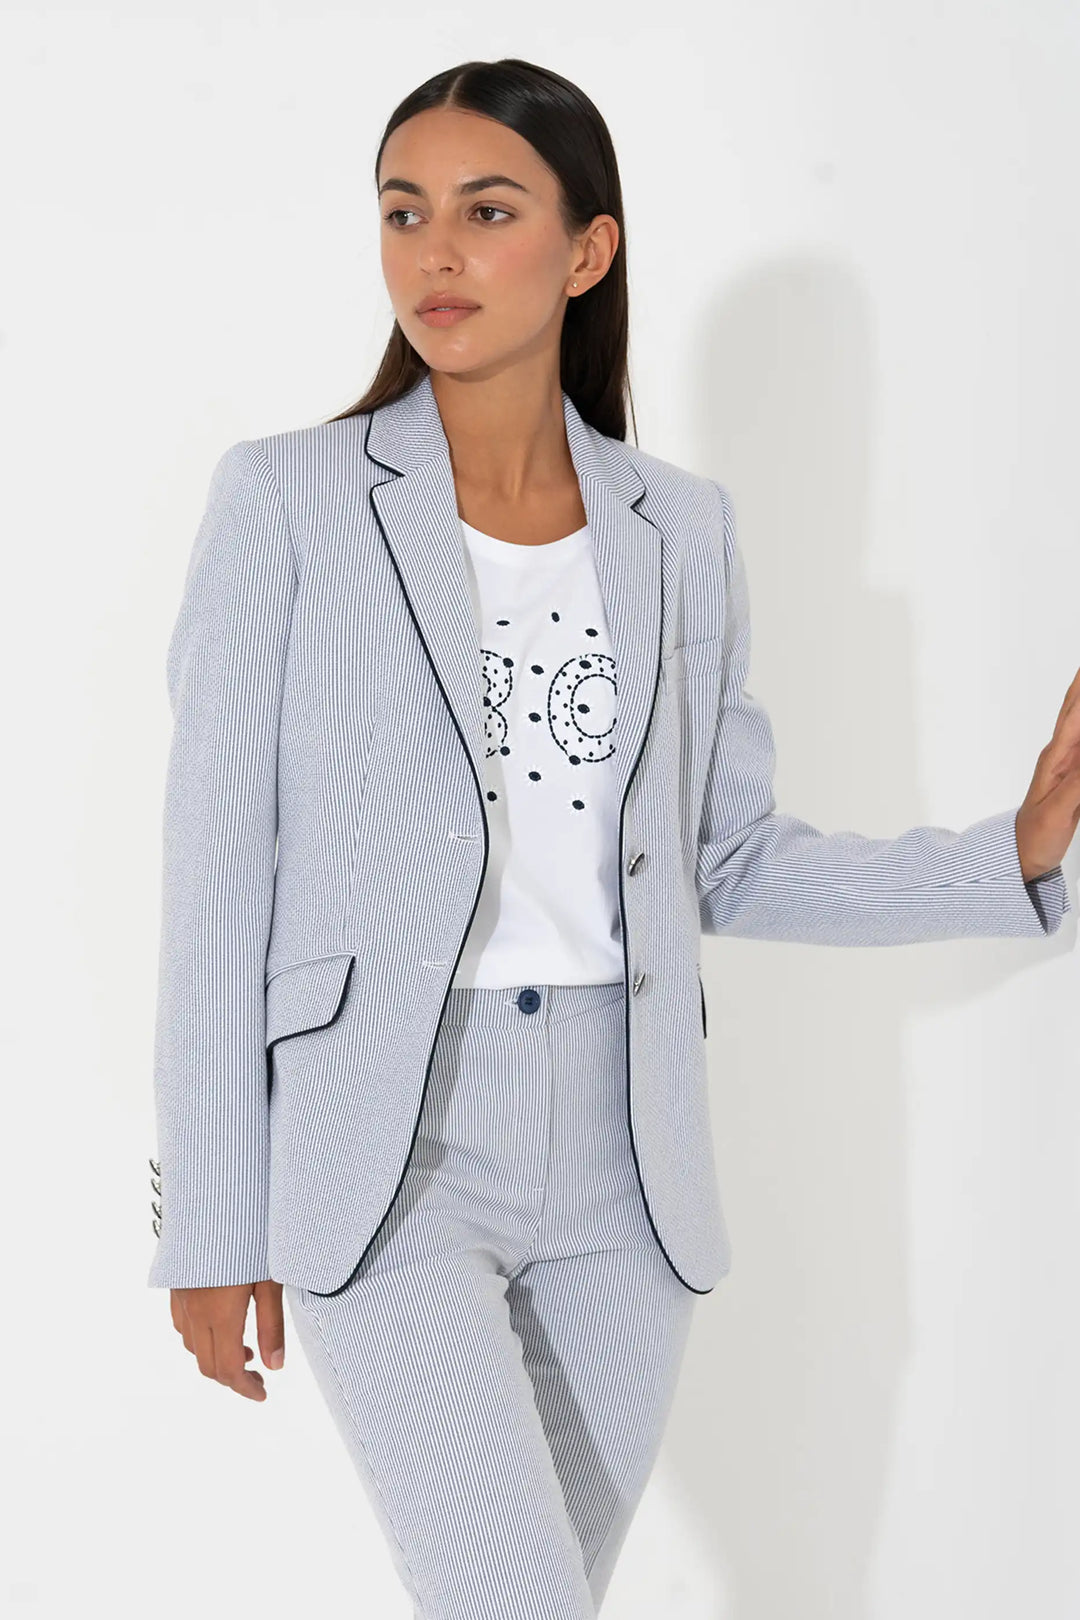 Model in the 'Muralla24' style light blue grey pinstripe blazer with notched lapels and a double-button closure, paired with a casual white tee and coordinating trousers.